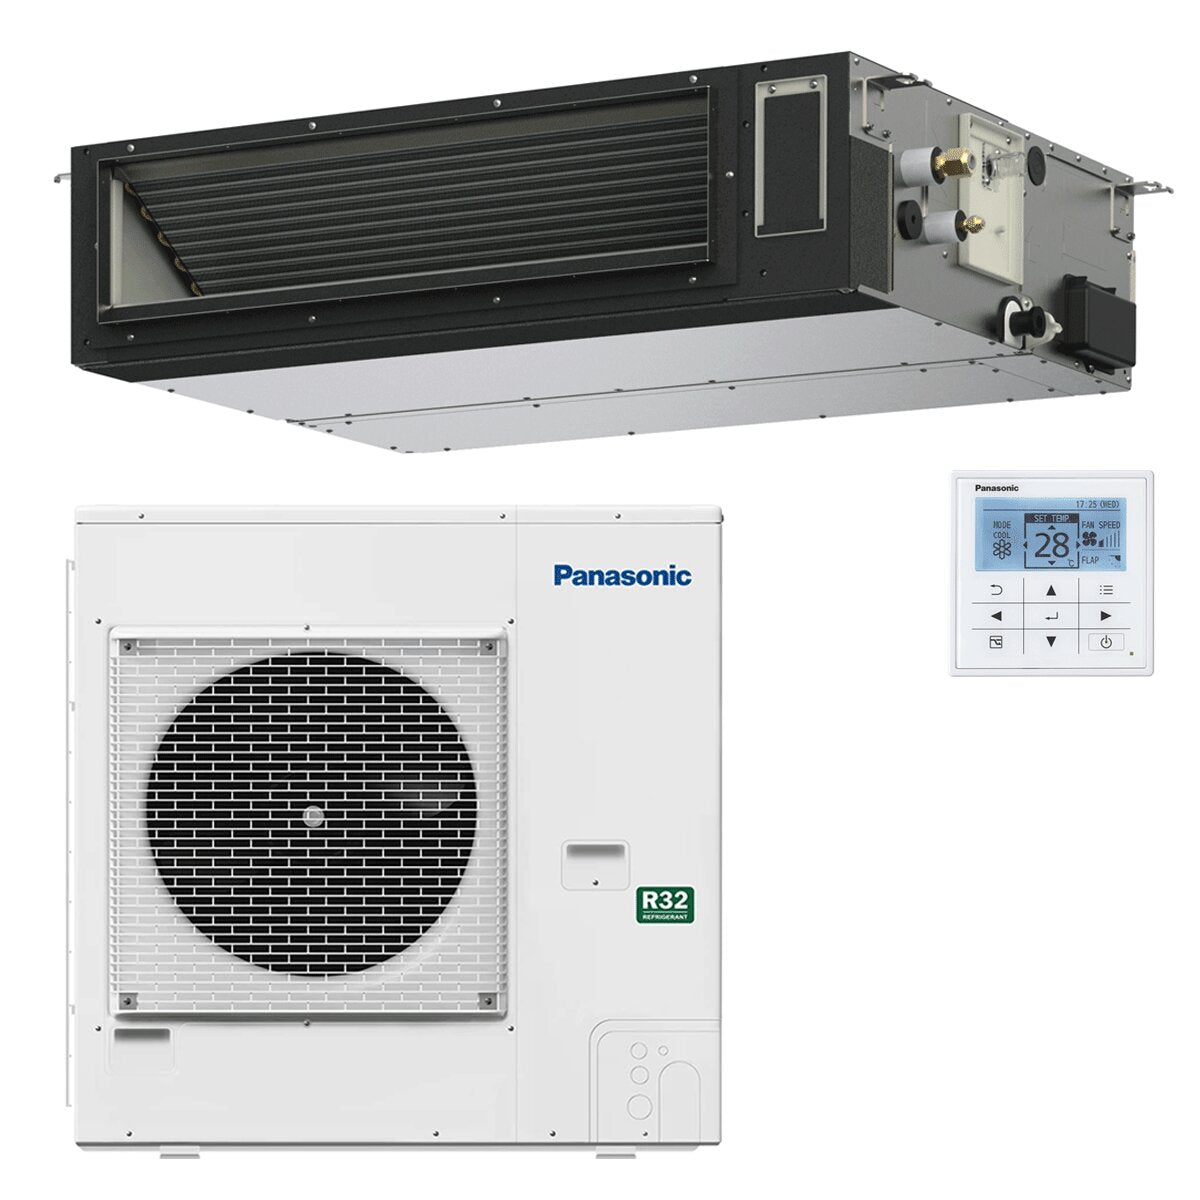 Panasonic Ducted Air Conditioner PACi NX Standard 34000 BTU R32 Inverter A++/A